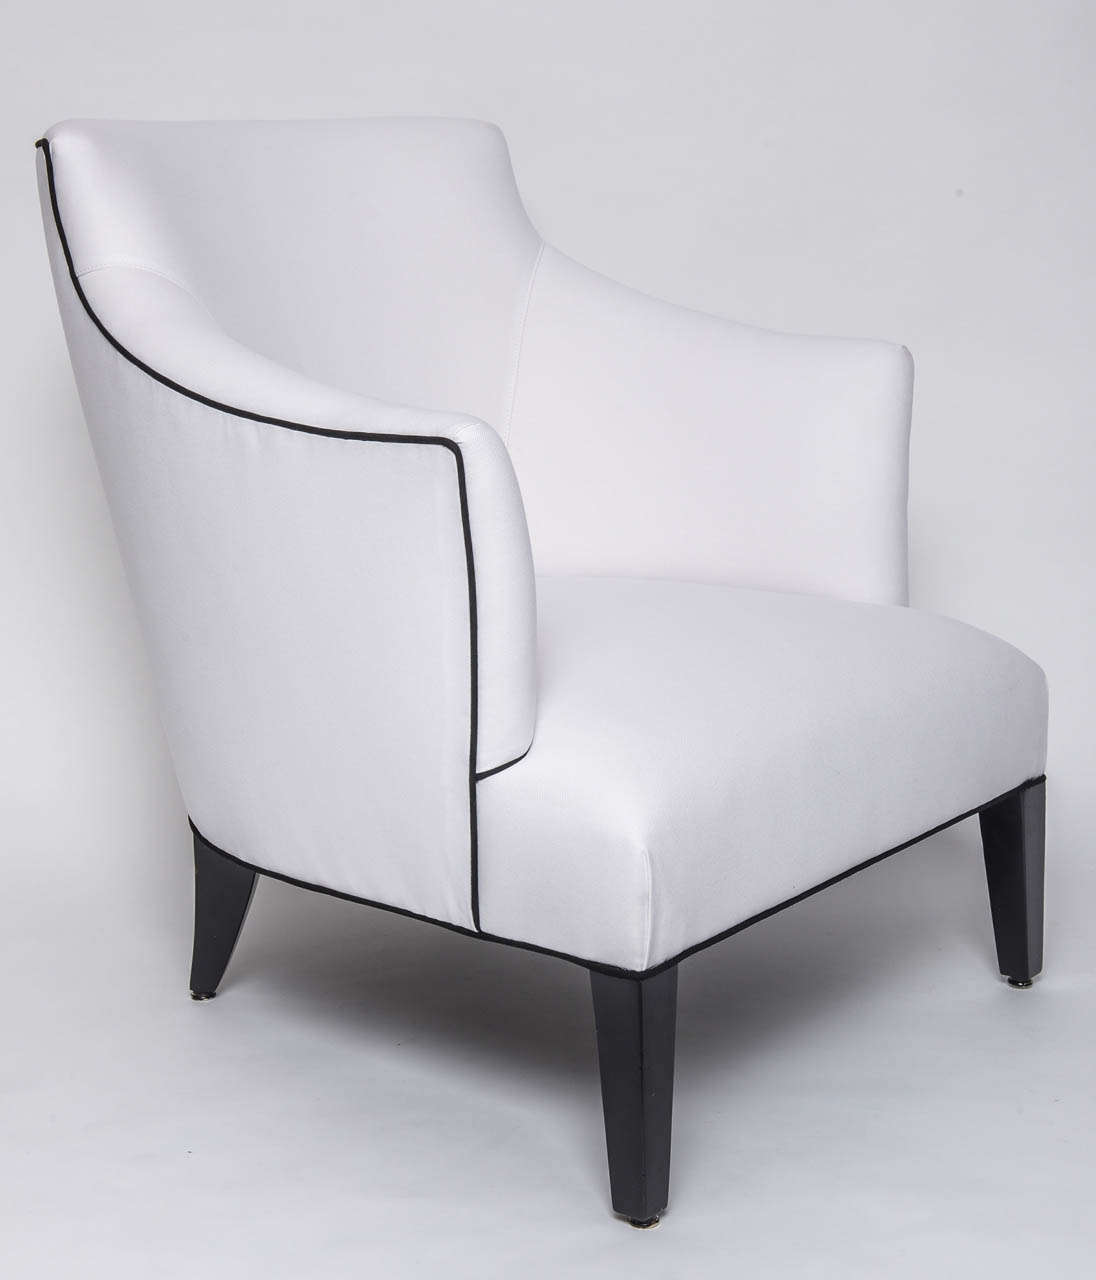 SALE! SALE! SALE!  STUDIO BUILT WHITE CHAIR BY SUSANER. floor sample as is In Excellent Condition For Sale In Miami, Miami Design District, FL